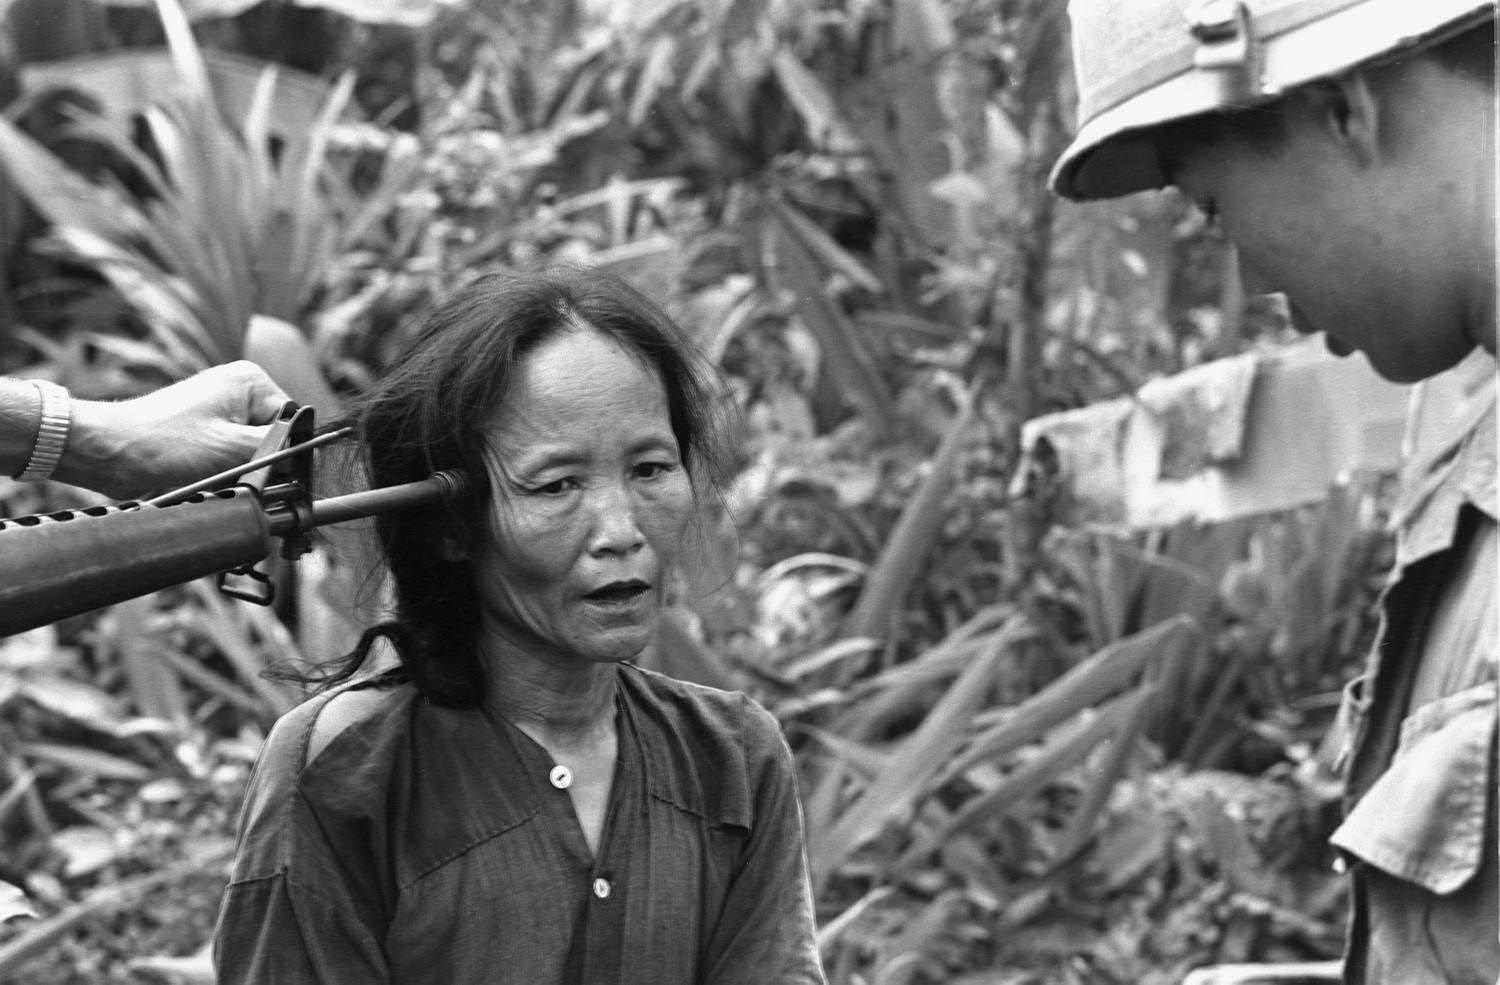 A suspected Viet Cong woman is questioned by a South Vietnamese officer while an American soldier holds a gun to her head in 1968.